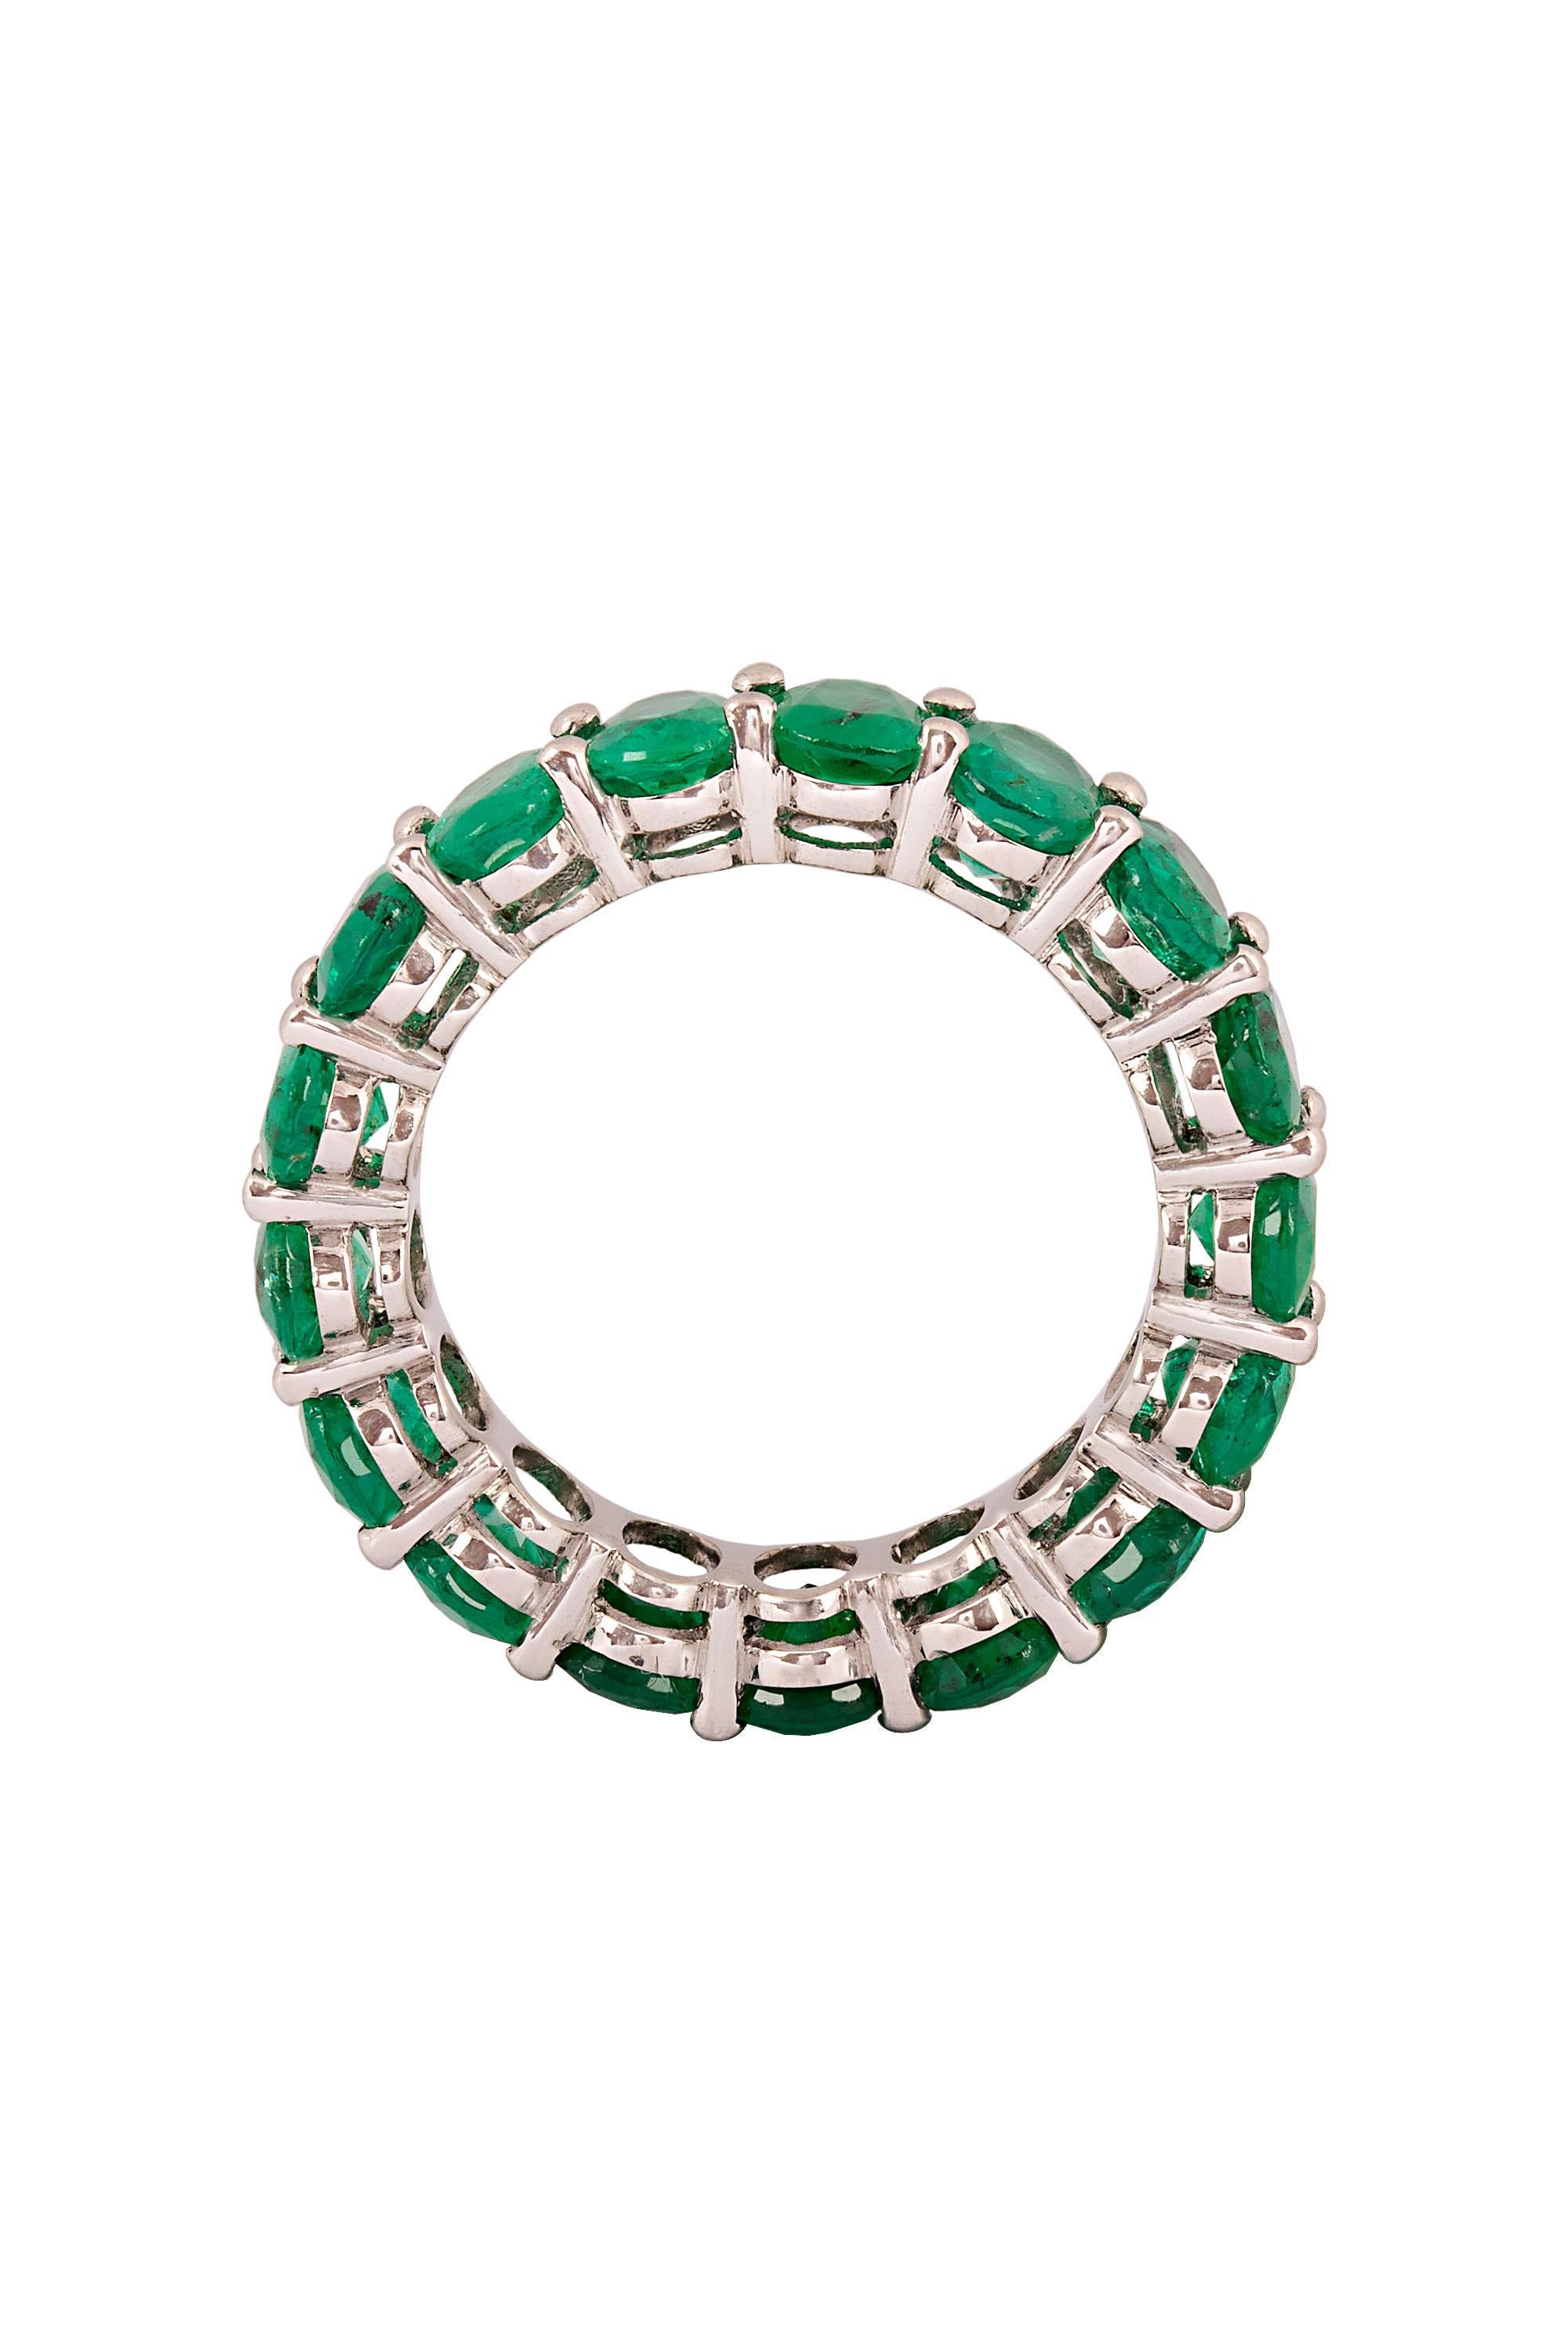 A gorgeous eternity band composed of seventeen vivid green oval emeralds set in a discreet platinum mounting. Unique, polished and gorgeous. Created and crafted in Beverly Hills by Gems Are Forever, Inc. With a total emerald weight of approximately